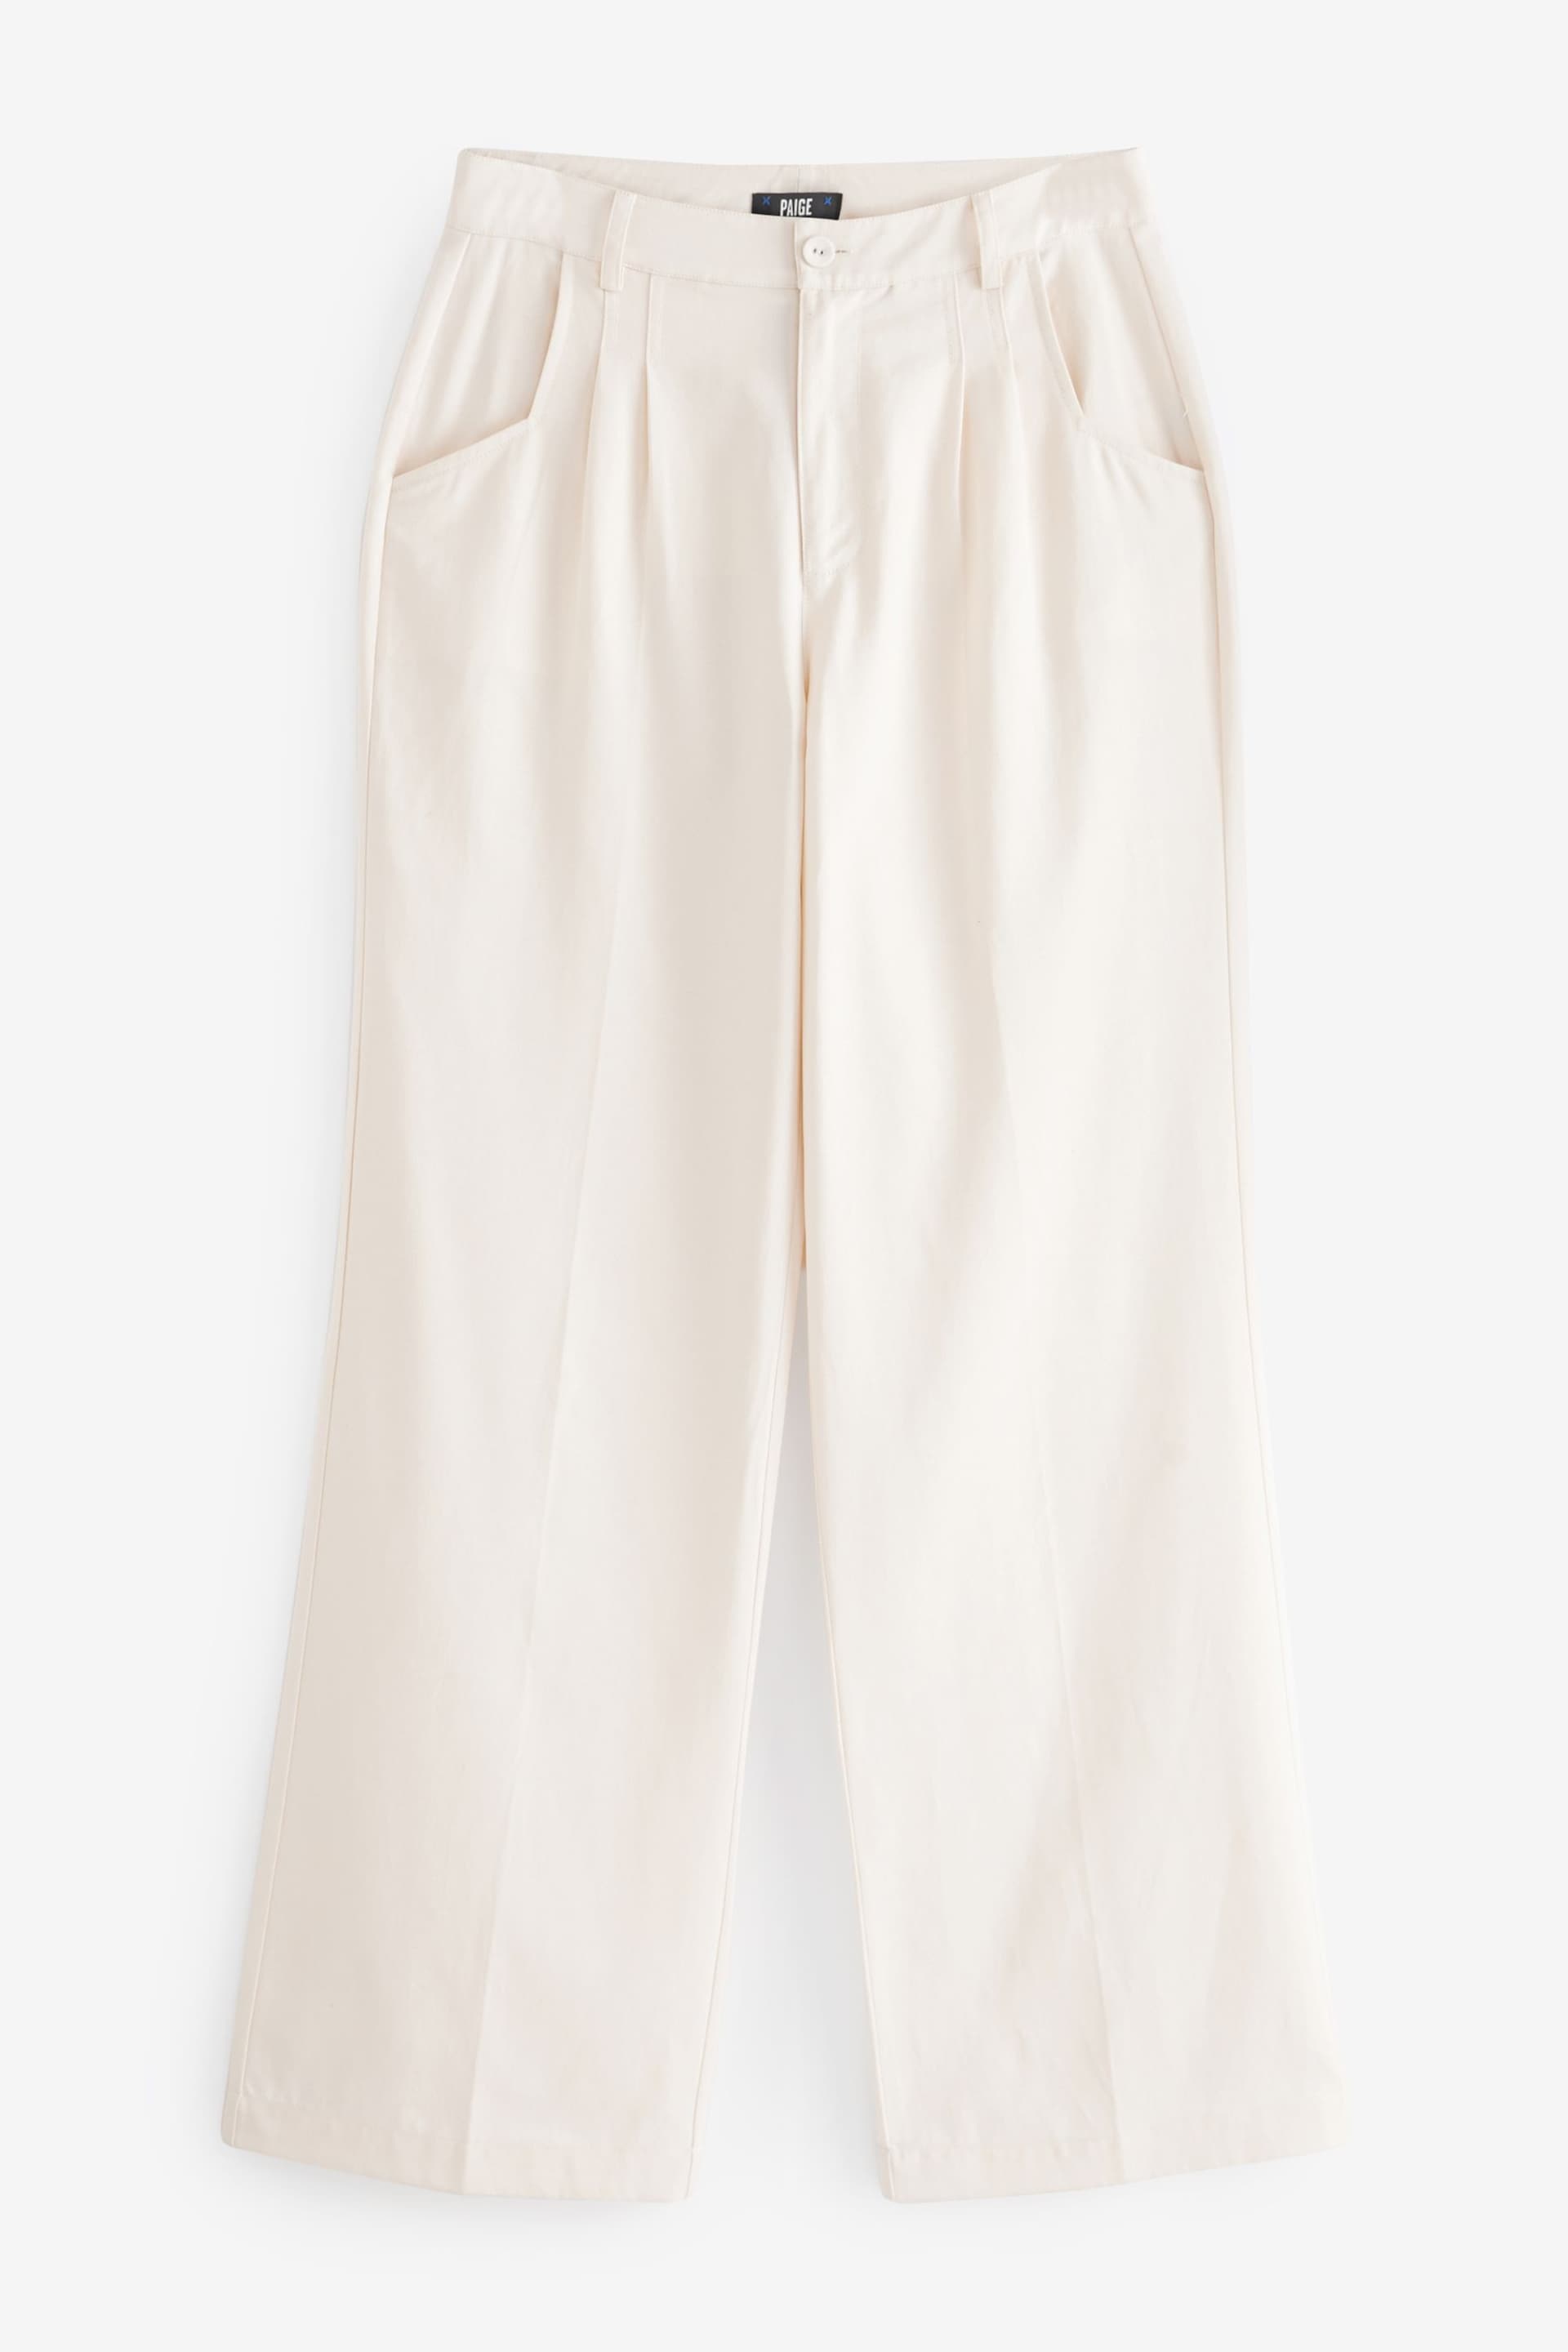 Paige Merano Wide Leg White Trousers - Image 5 of 5